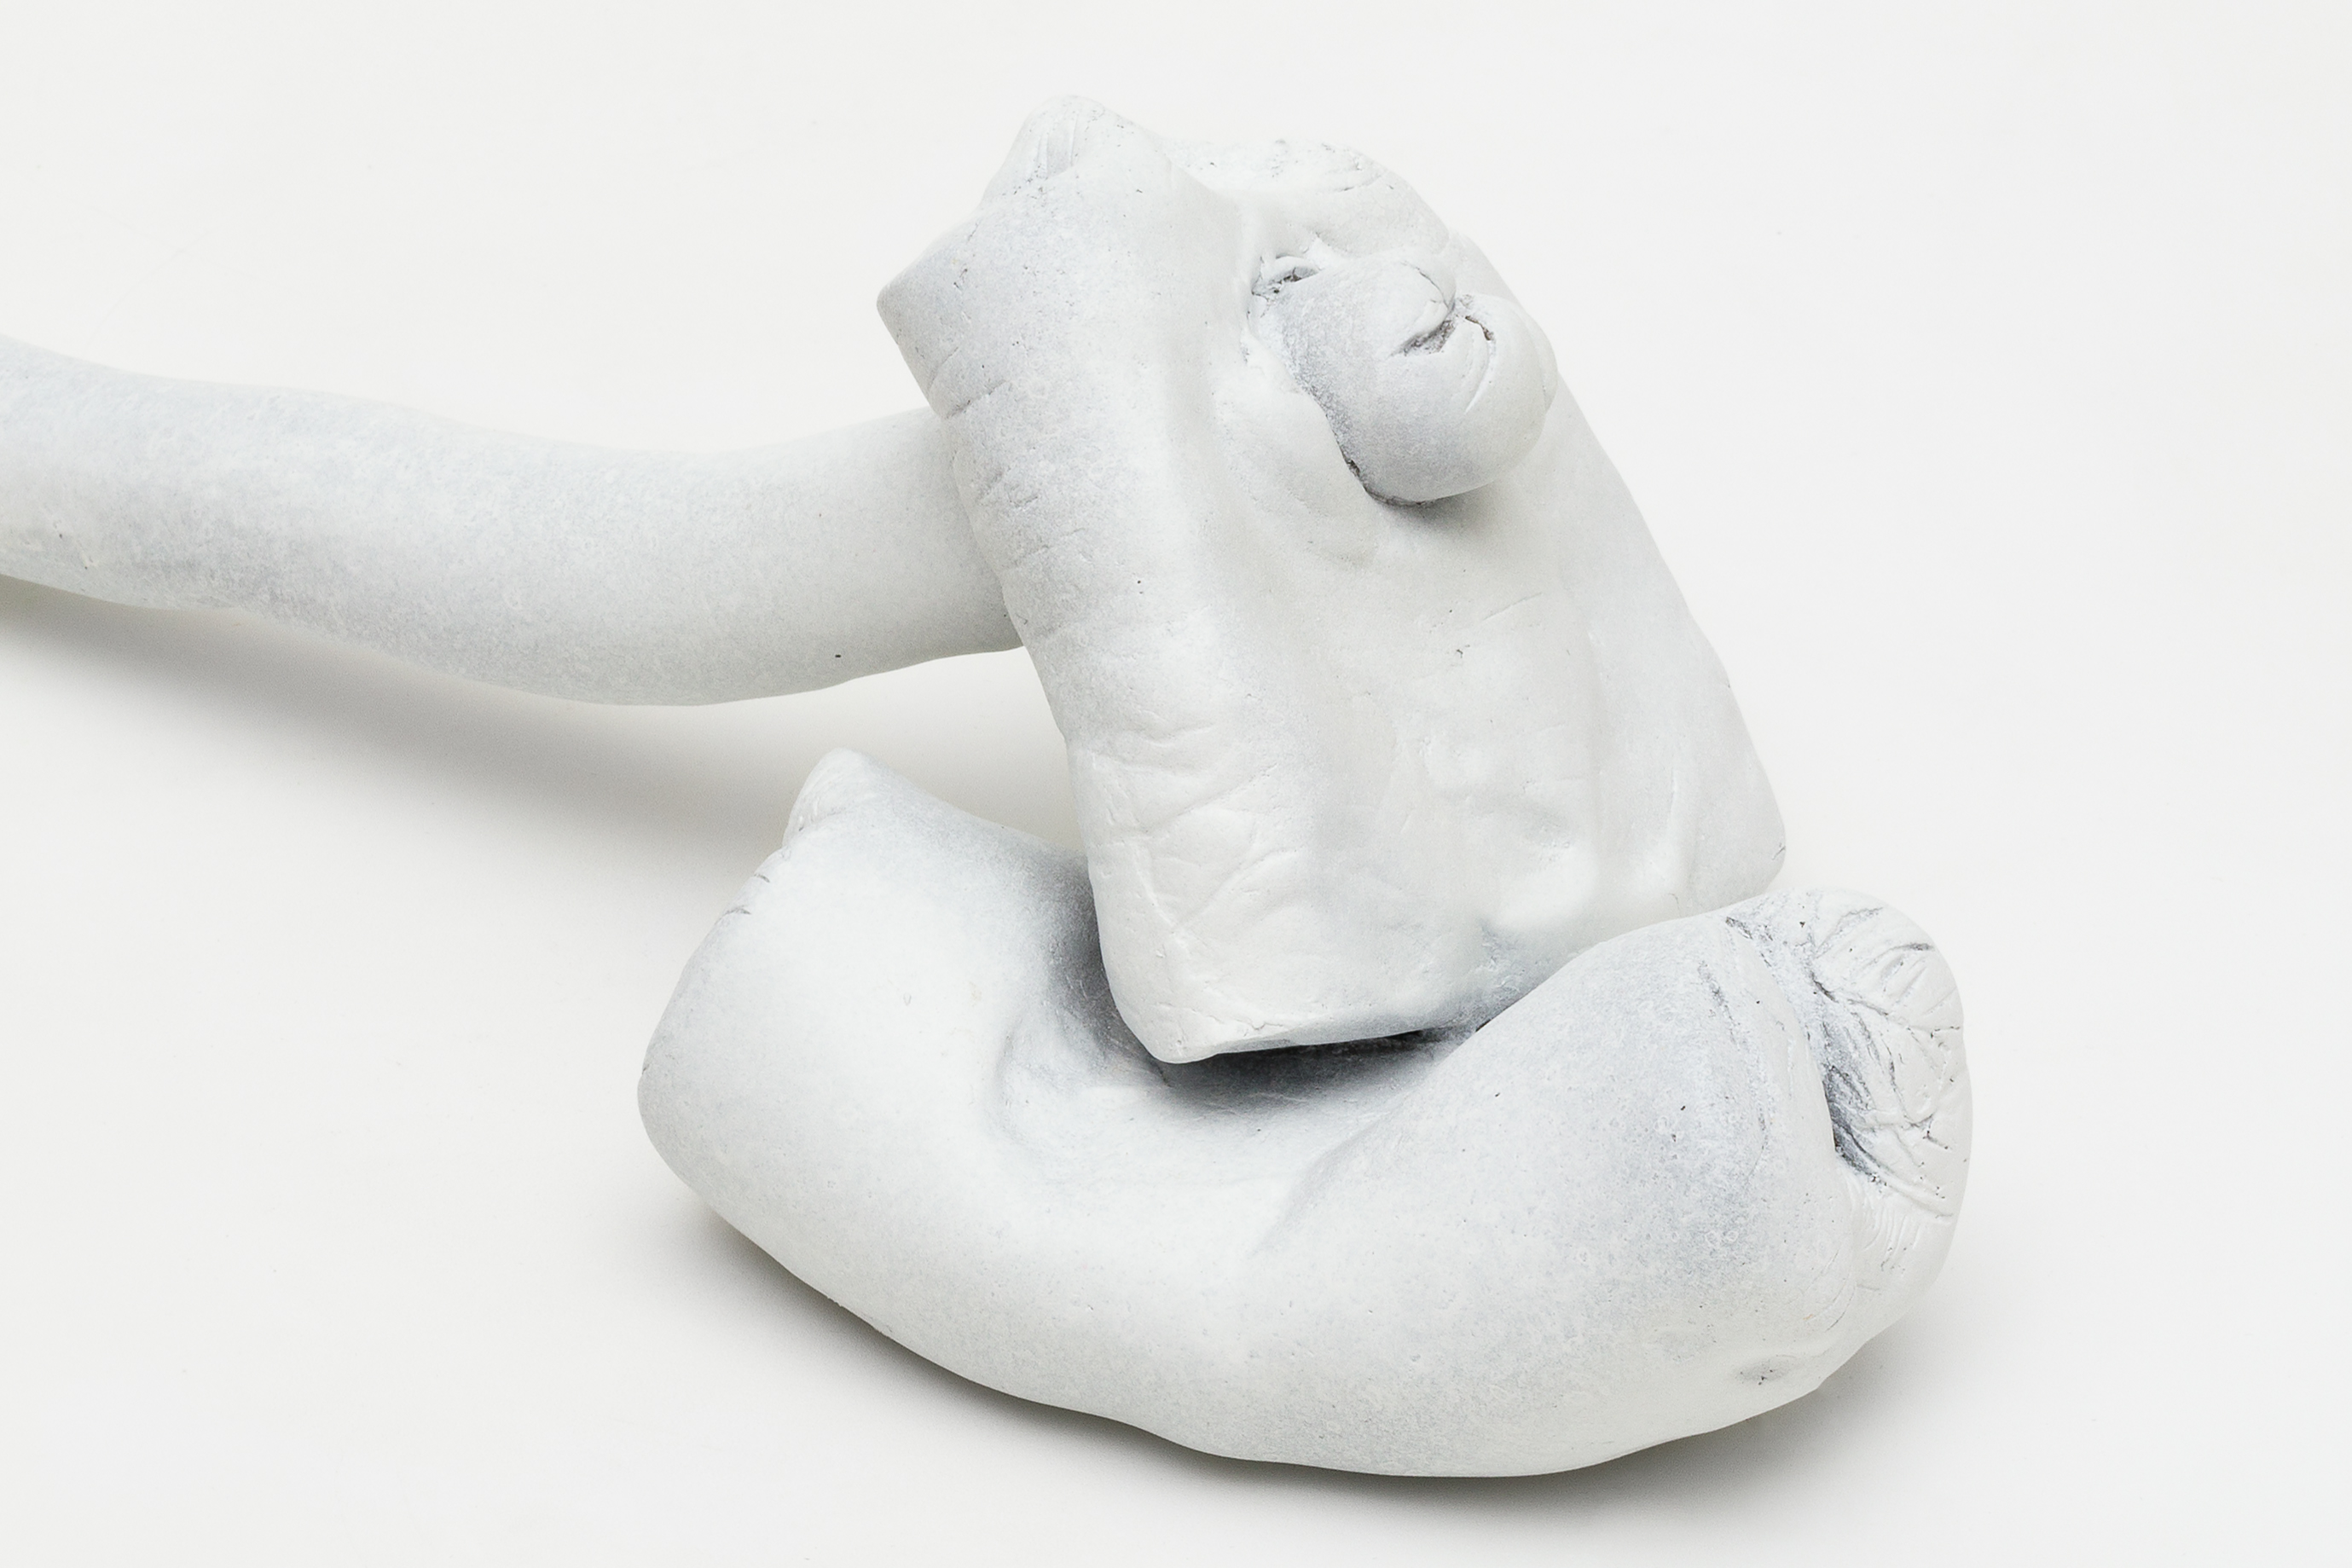 Detail view of Paulo Monteiro's Untitled white patina sculpture